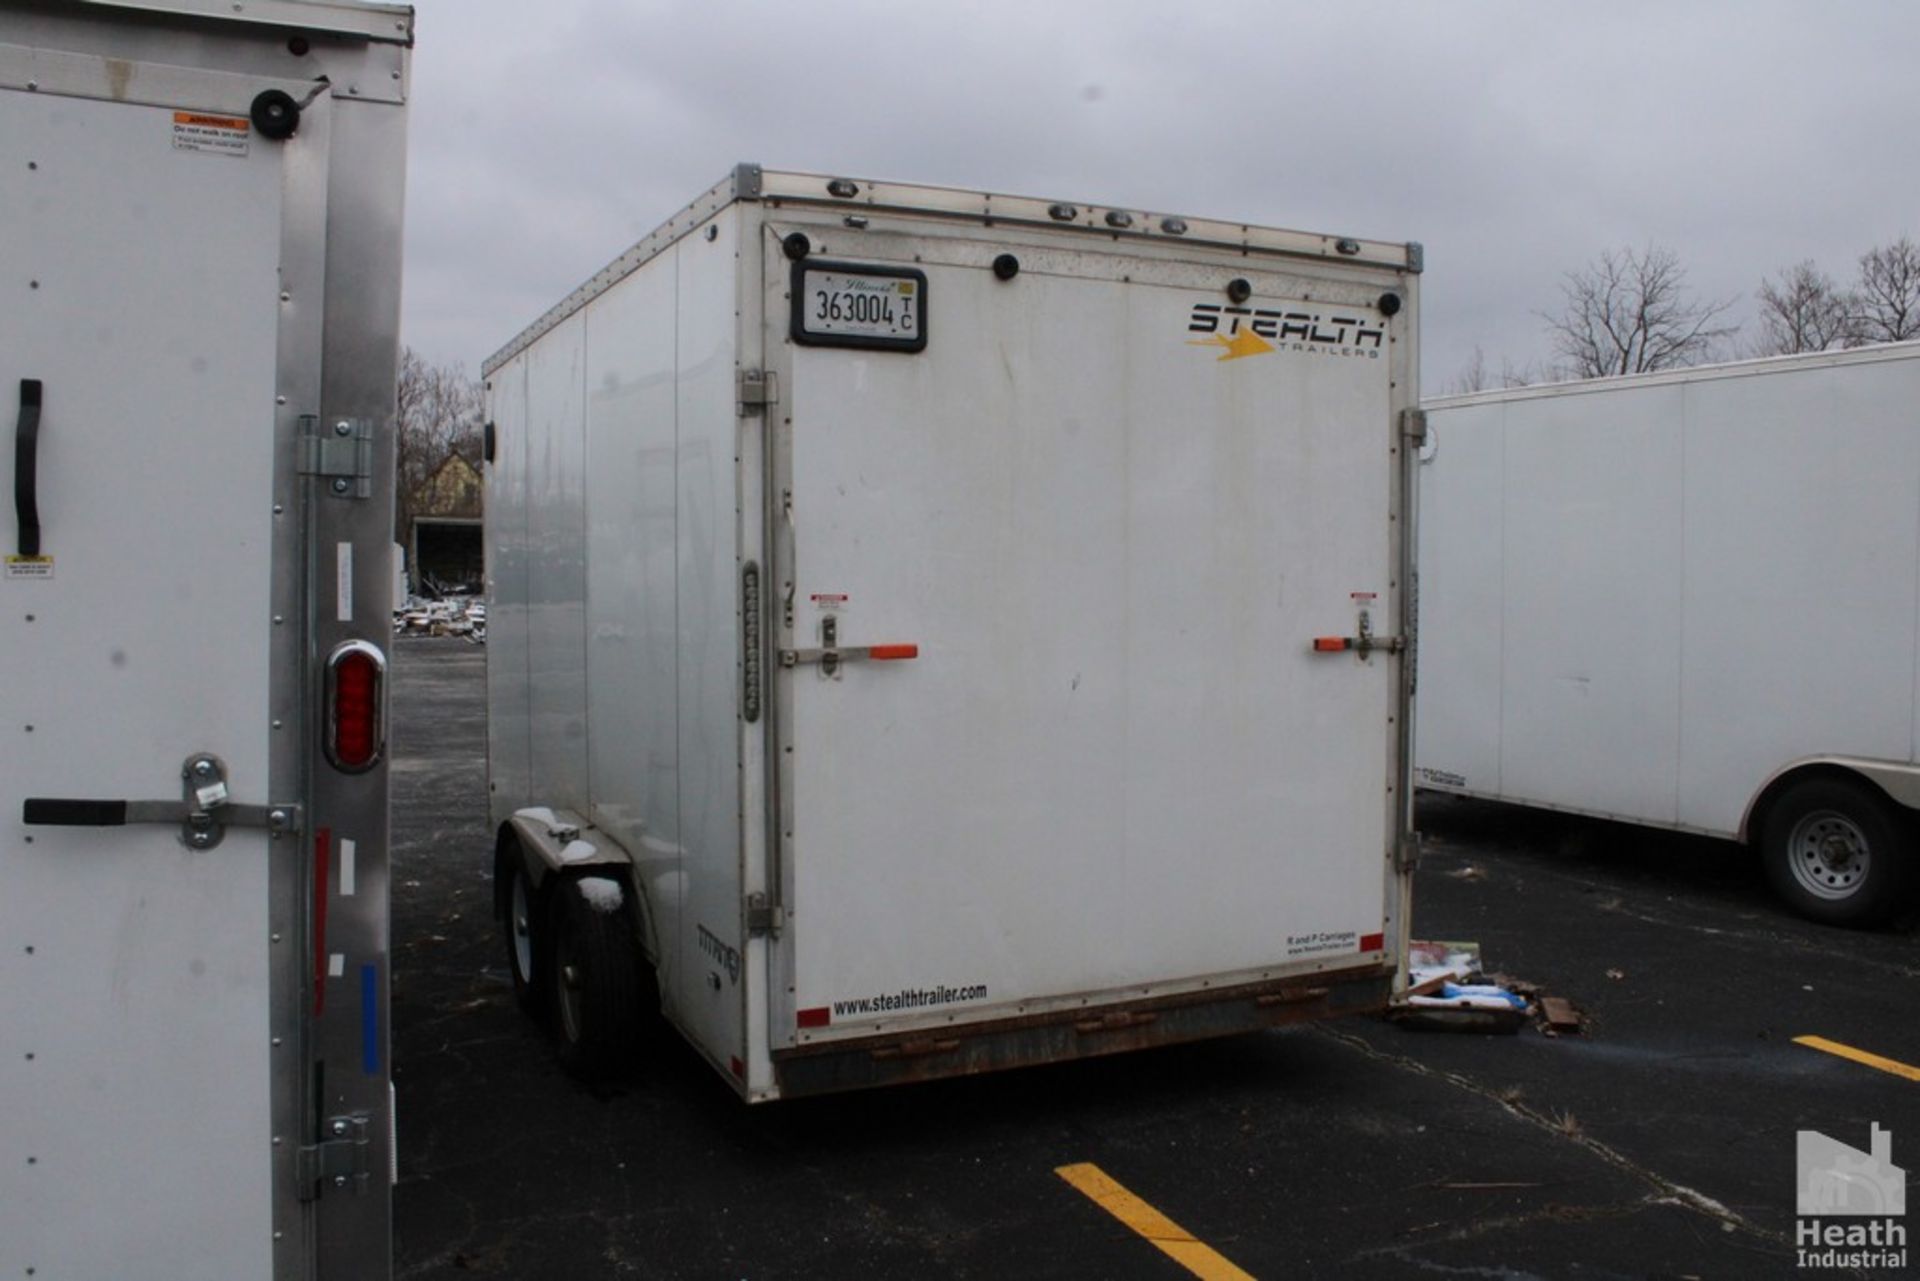 STEALTH 14’ ENCLOSED TRAILER, VIN: 52LBE1420LE078405 (NEW 2020), WITH SIDE DOOR, DROP DOWN BACK - Image 2 of 4